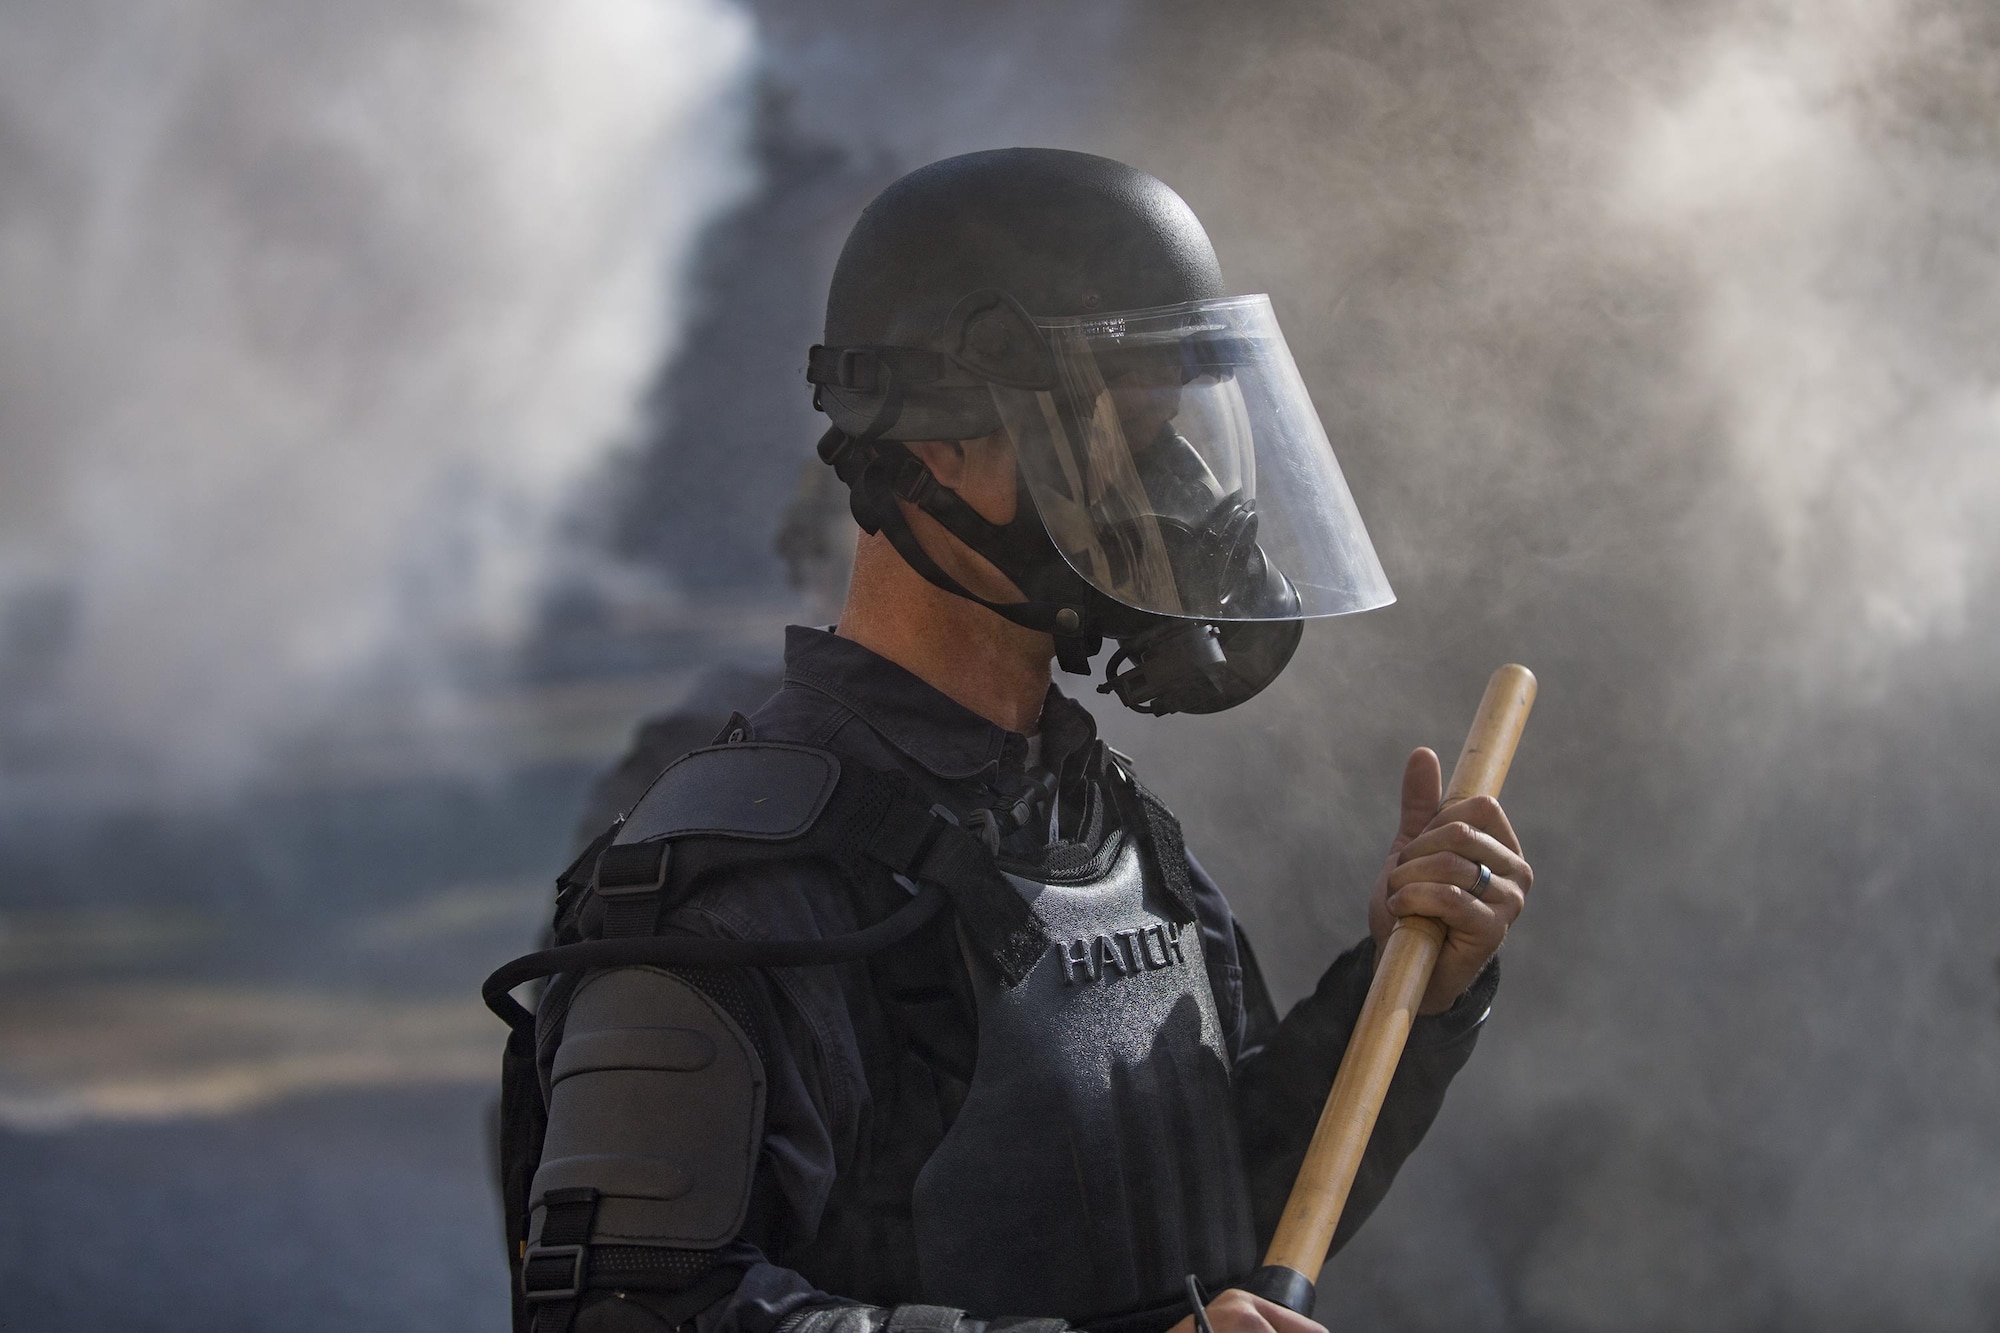 A member of Georgia State Patrol’s Mobile Field Force stands in the haze of smoke grenades, Nov. 16, 2016, at Moody Air Force Base, Ga. Moody facilitated this training by providing the Military Operations in Urban Terrain village, a training area consisting of buildings, obstacles and gravel roads. (U.S. Air Force photo by Airman 1st Class Daniel Snider)